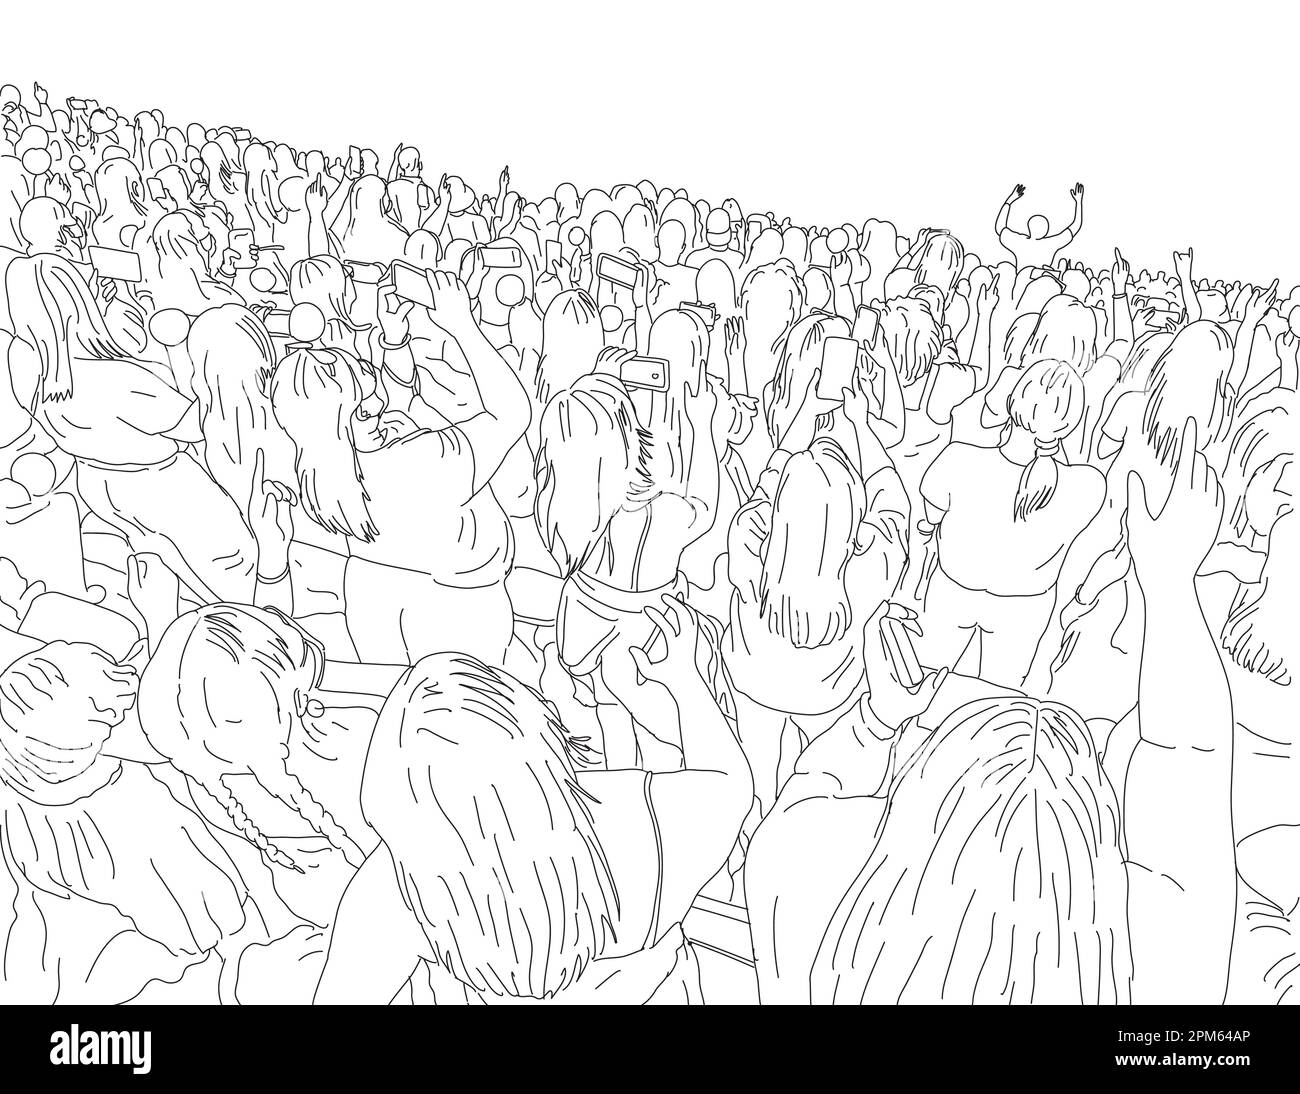 Line art drawing illustration of a large crowd of young people with cellphone or mobile phone at a live concert music event party festival on isolated Stock Photo